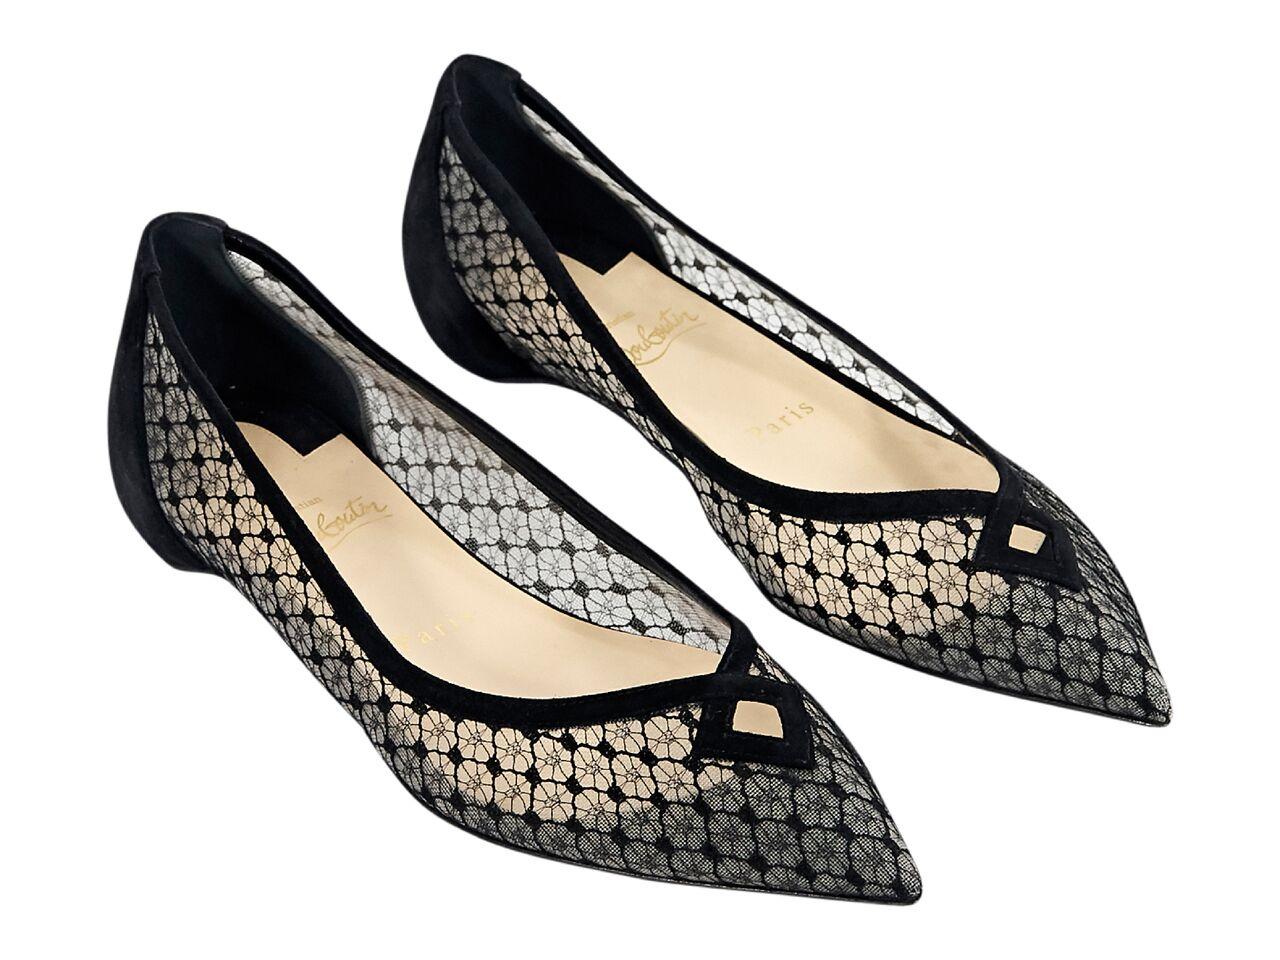 Product details:  Black mesh flats by Christian Louboutin.  Cutout detail at vamp.  Point toe.  Iconic red sole.  Slip-on style. 
Condition: Pre-owned. Very good. 
Est. Retail $ 995.00